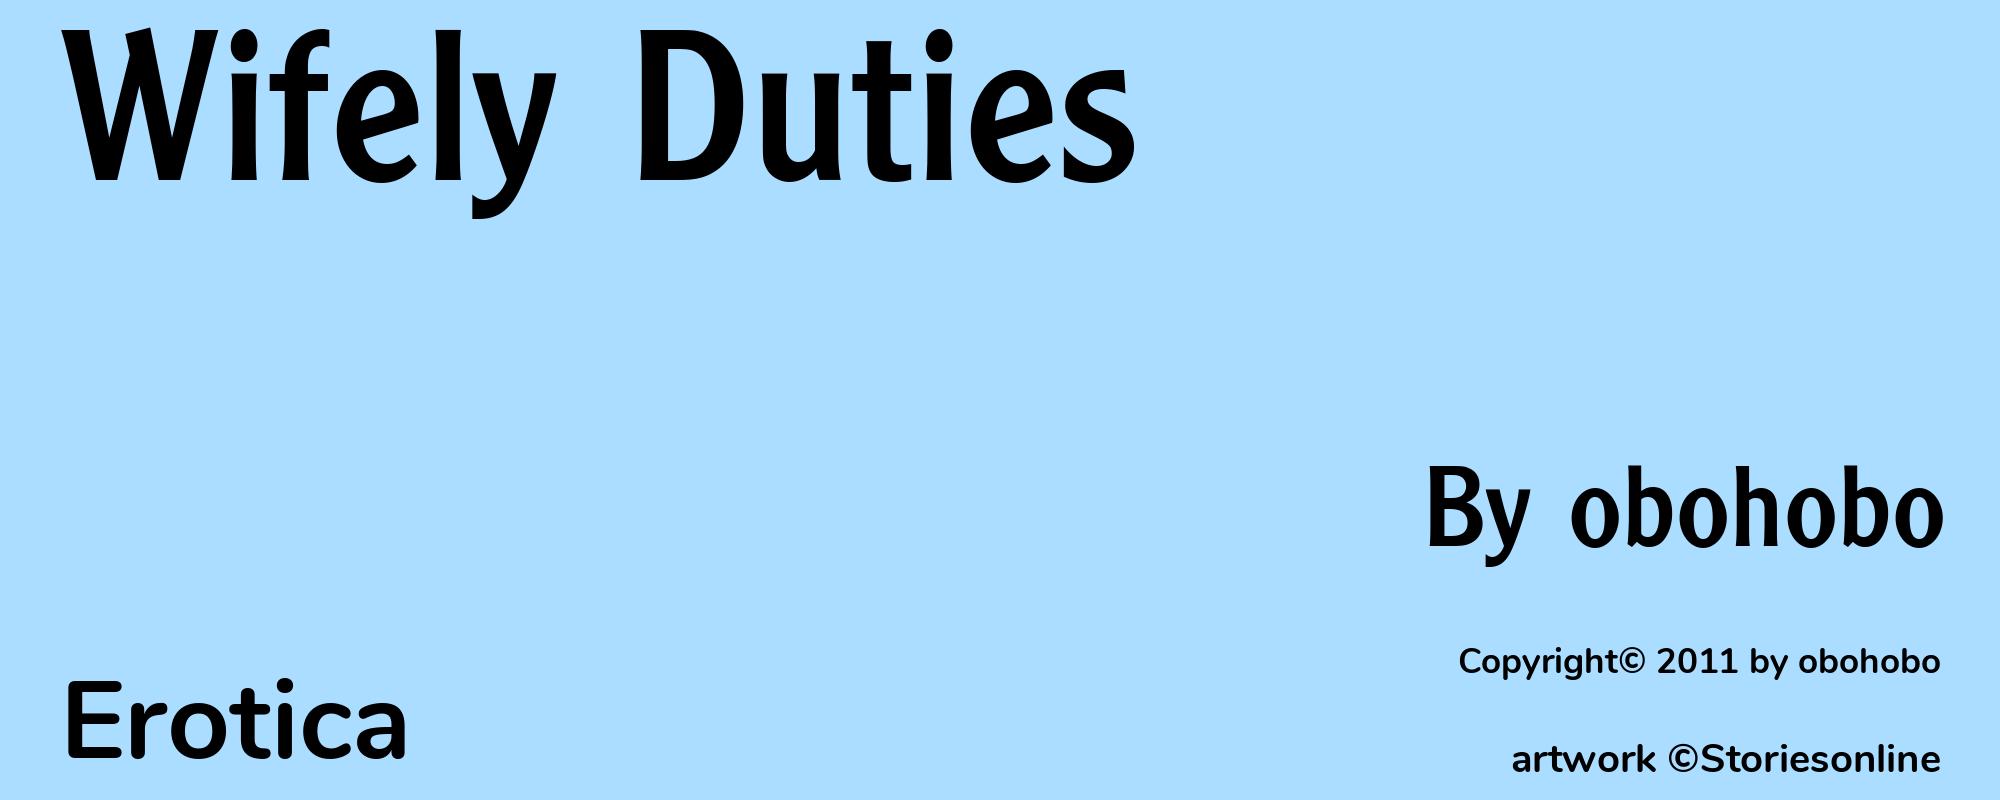 Wifely Duties - Cover